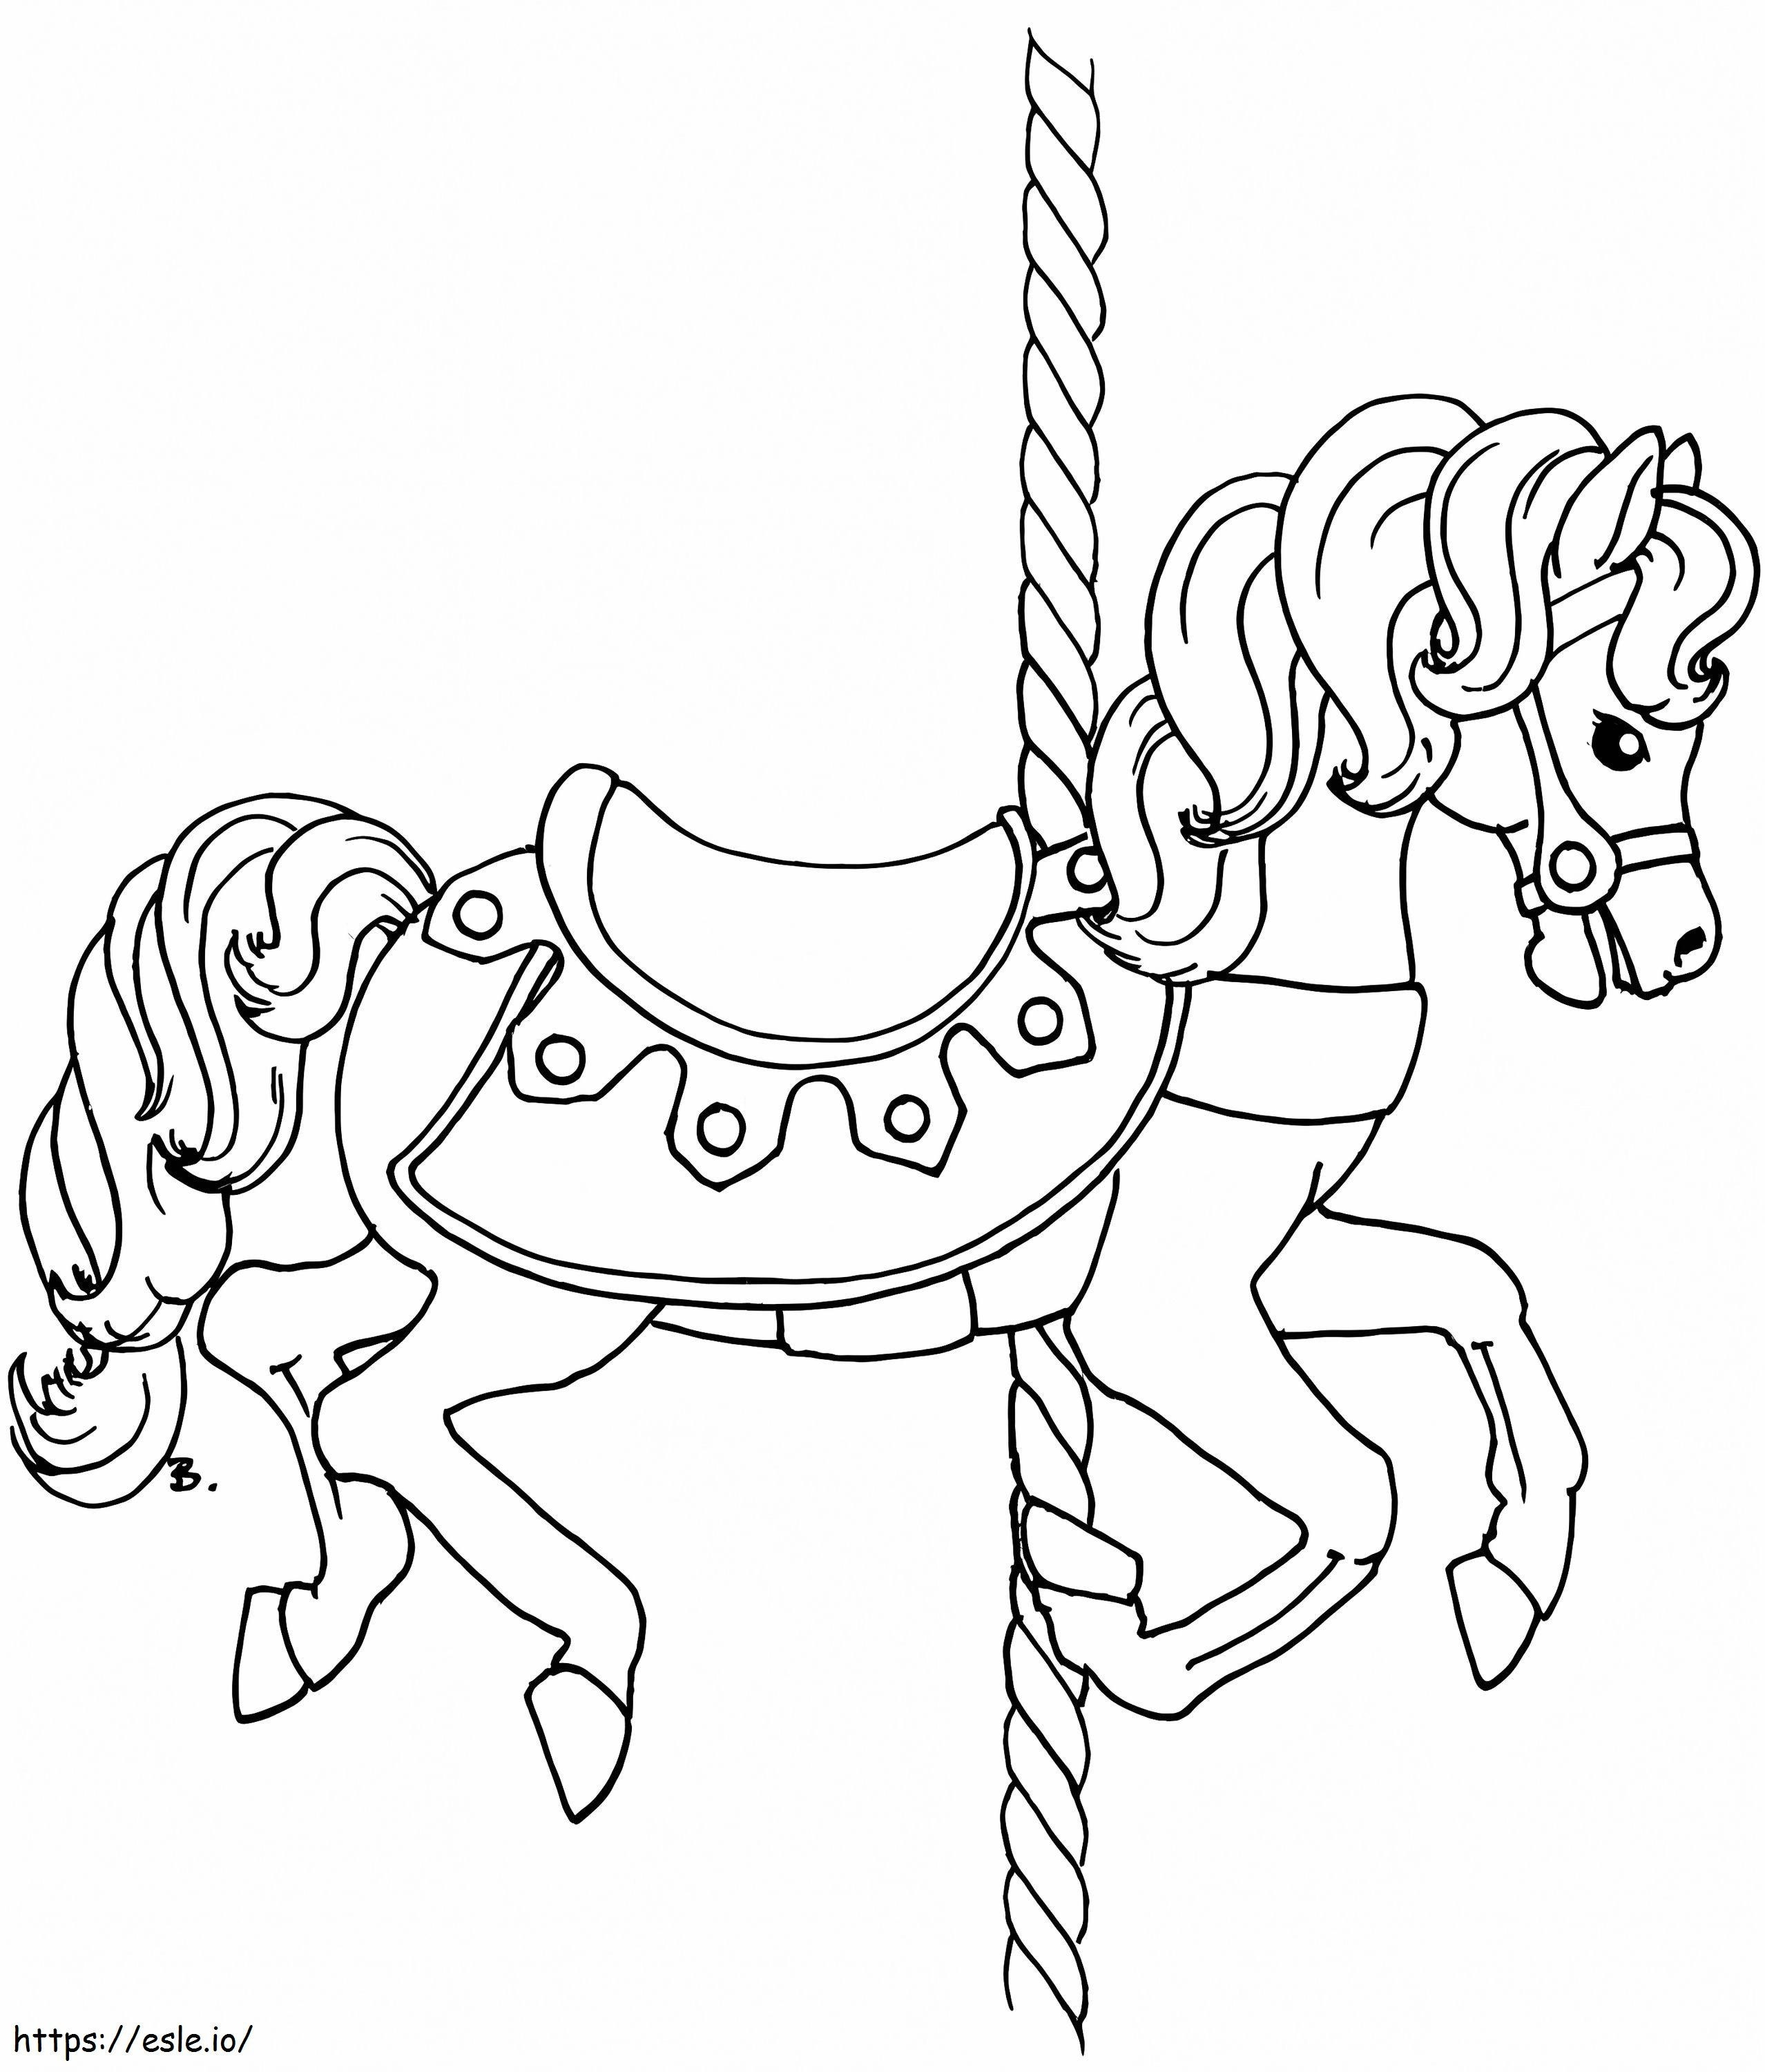 Cute Carousel Horse coloring page